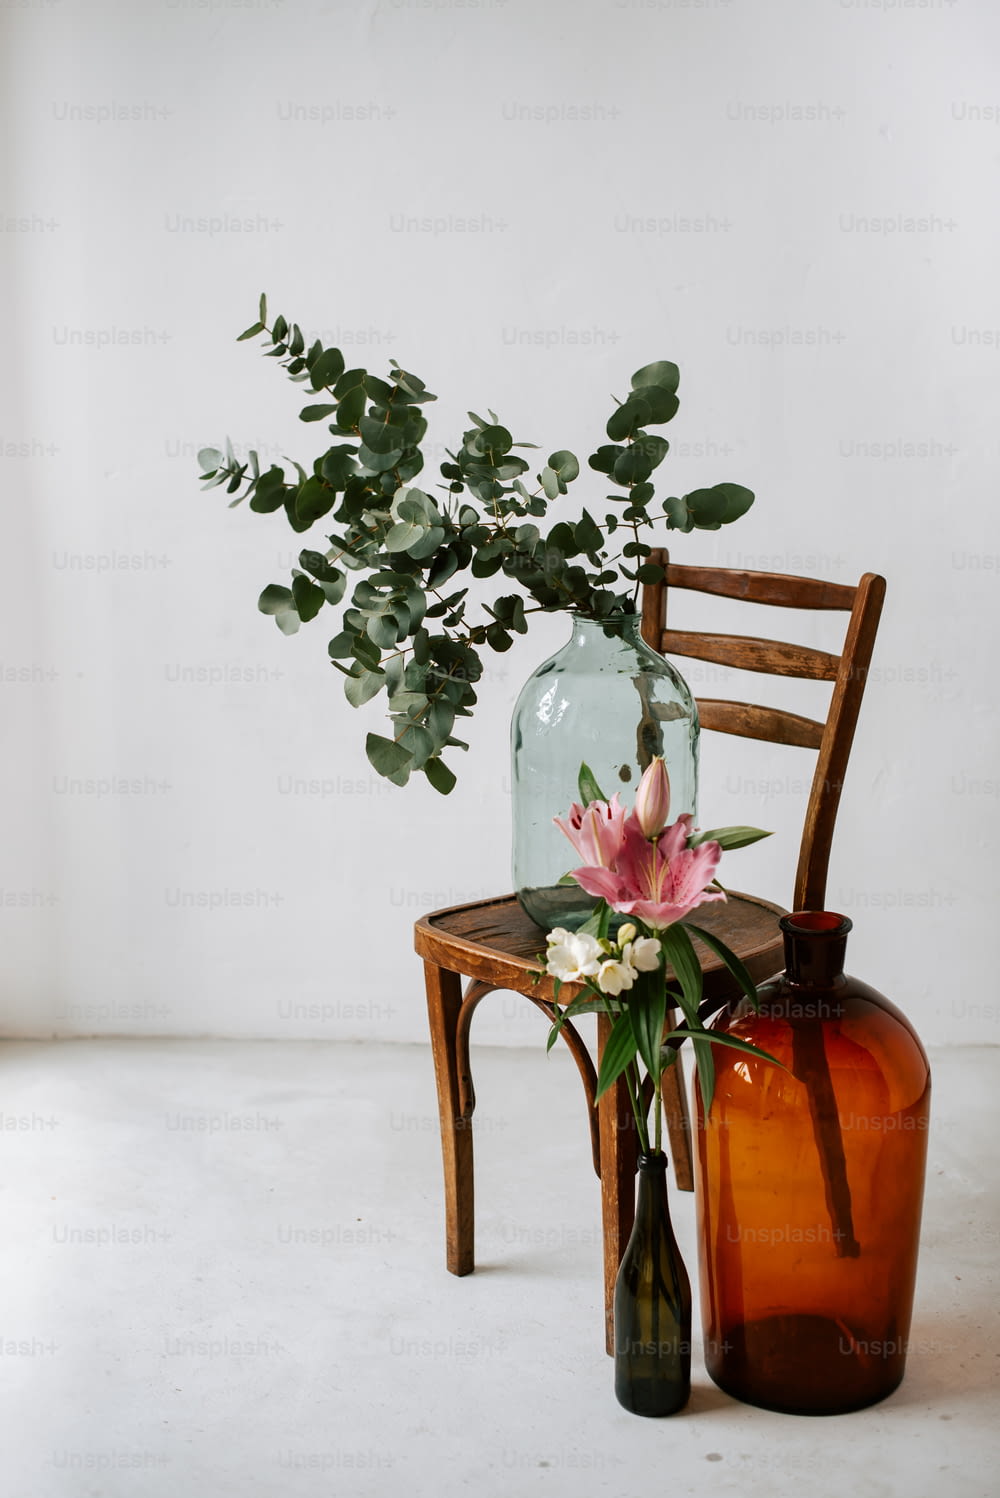 a chair with a vase and a vase with flowers on it